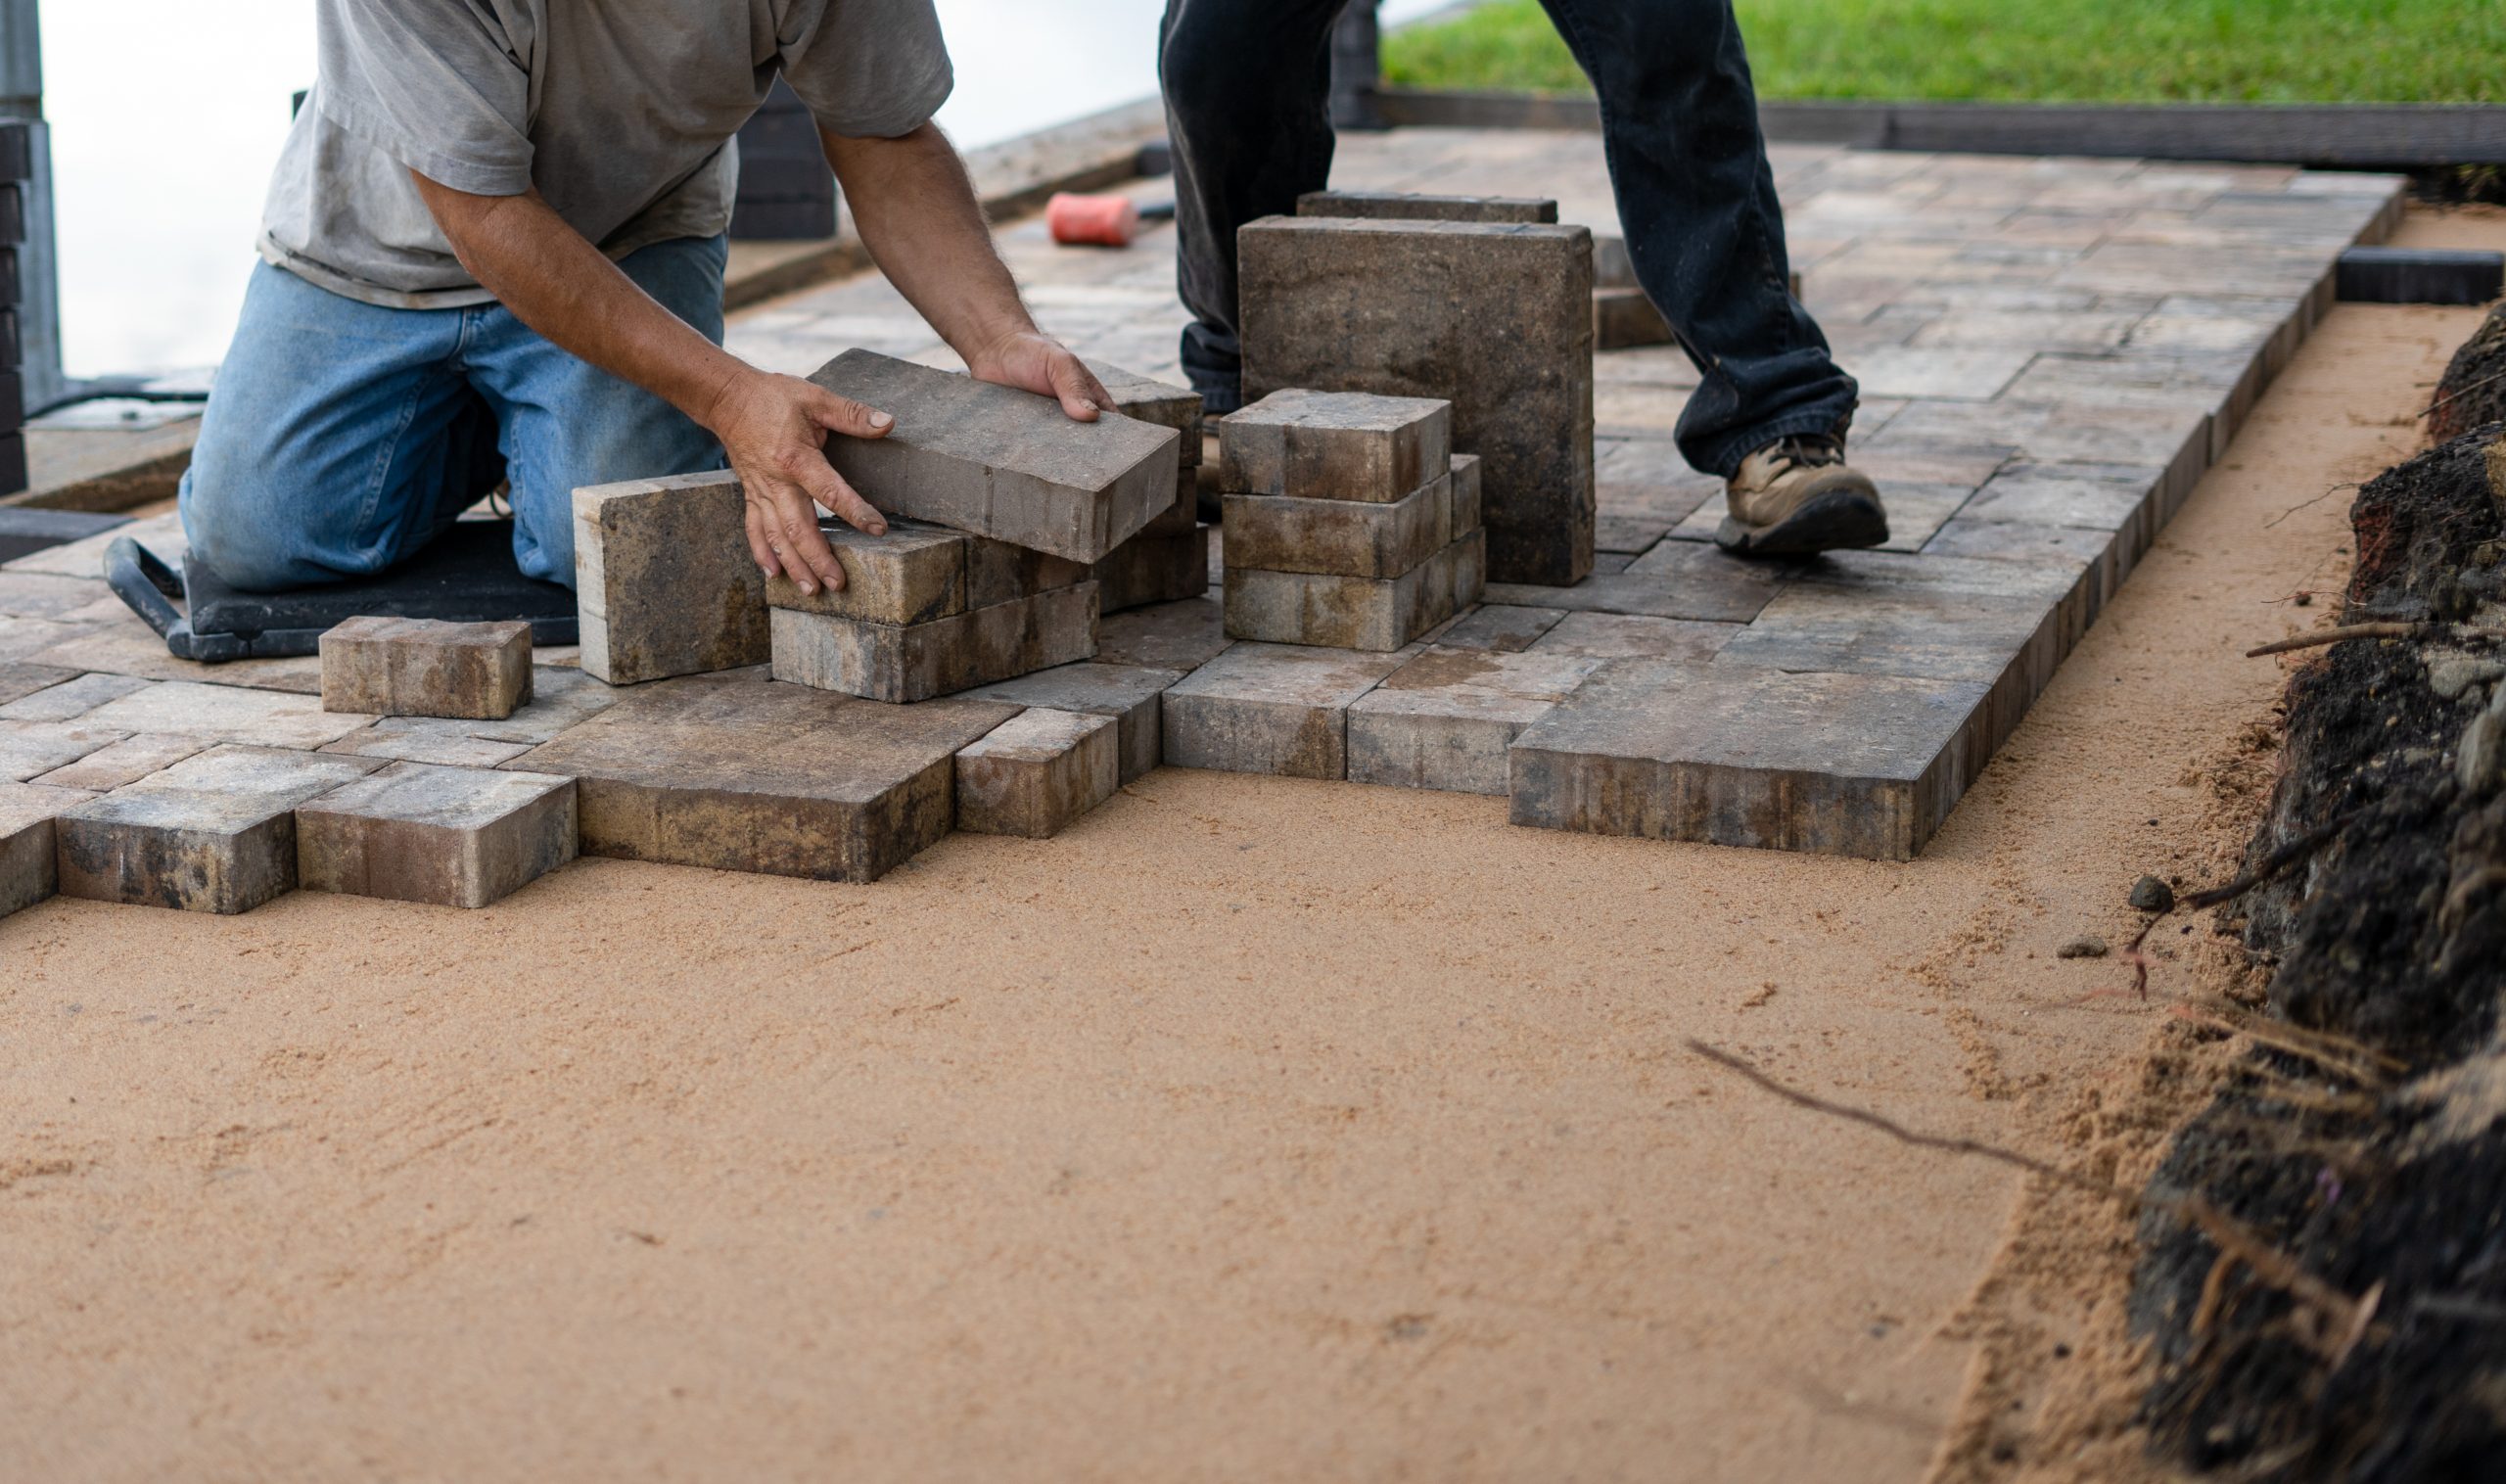 Properly installed pavers will prevent sinking, erosion, and other hazards from destroying your walkway, patio or driveway.